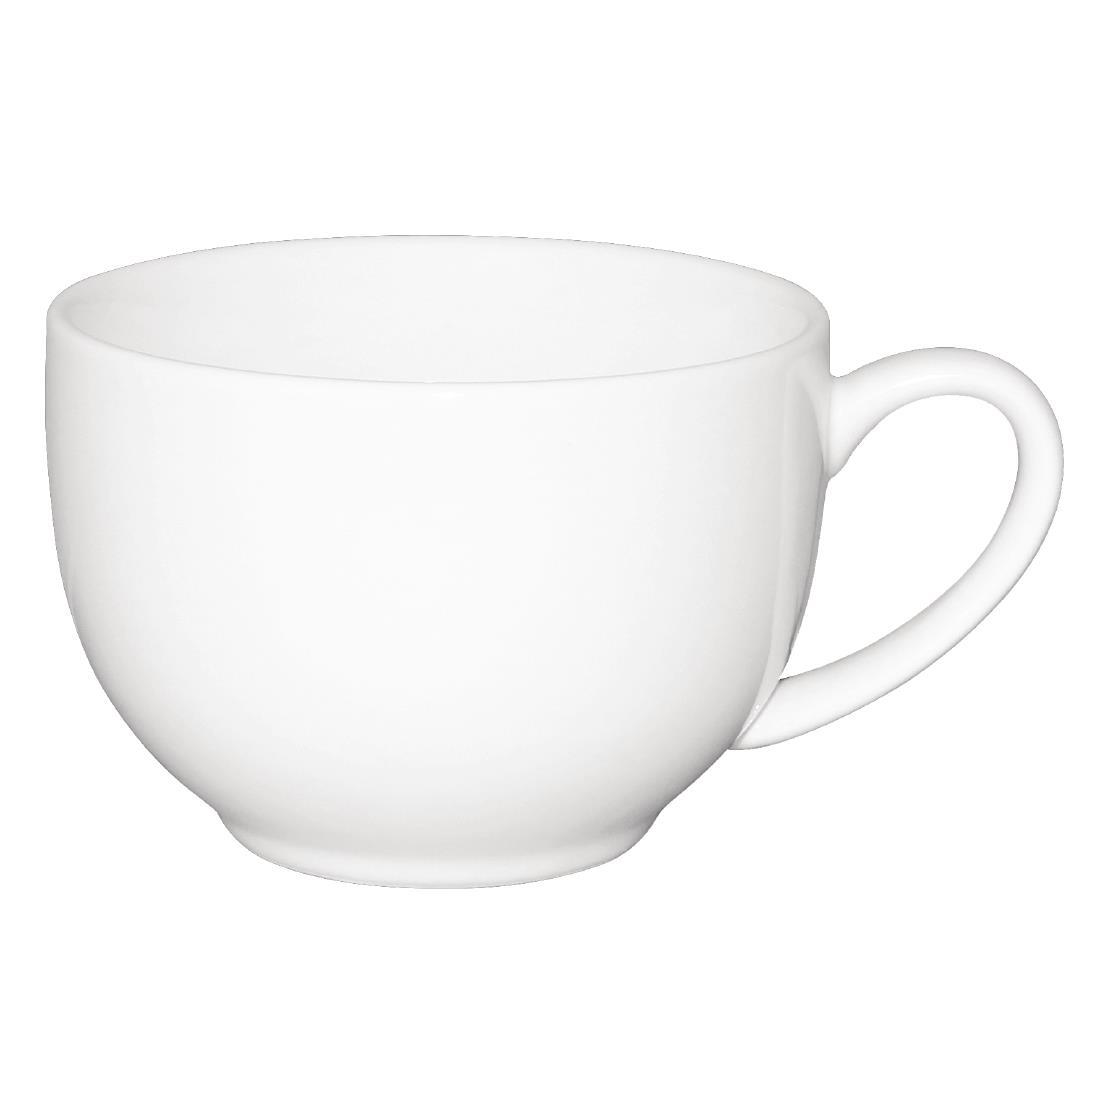 Olympia Cafe Cappuccino Cups White 340ml (Pack of 12) - GK077  - 2